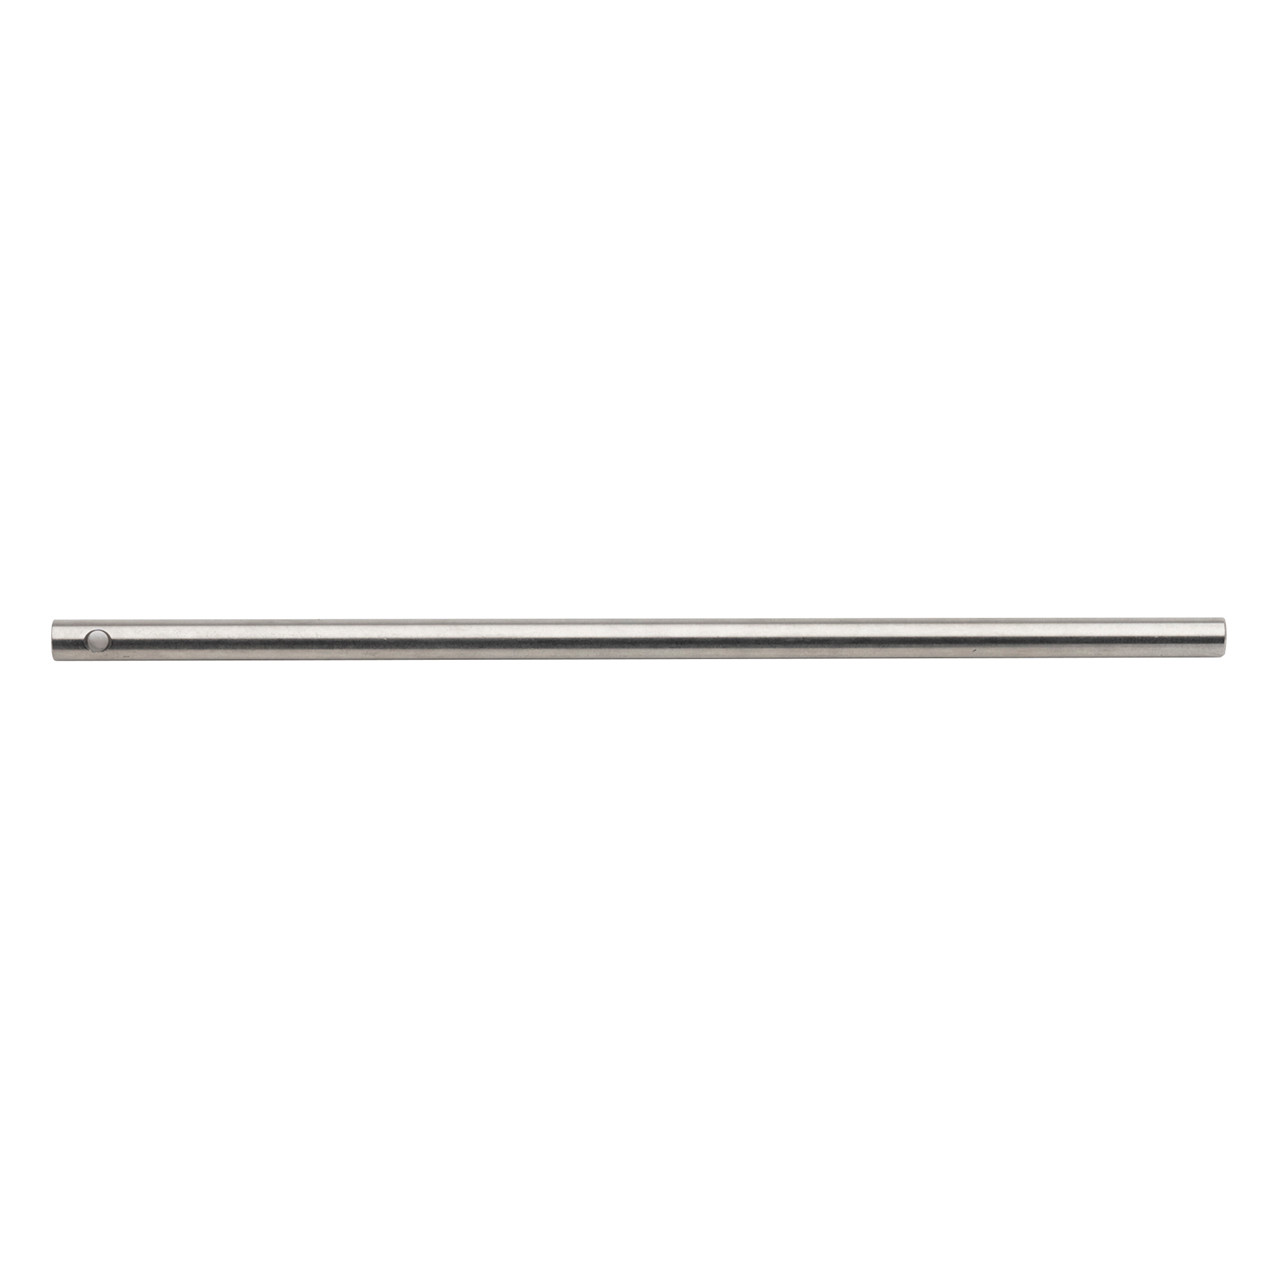 Shop Trident PDW Gas Tube Assembly - $ 12 - Krytac.com | For Airsoft Use Only.